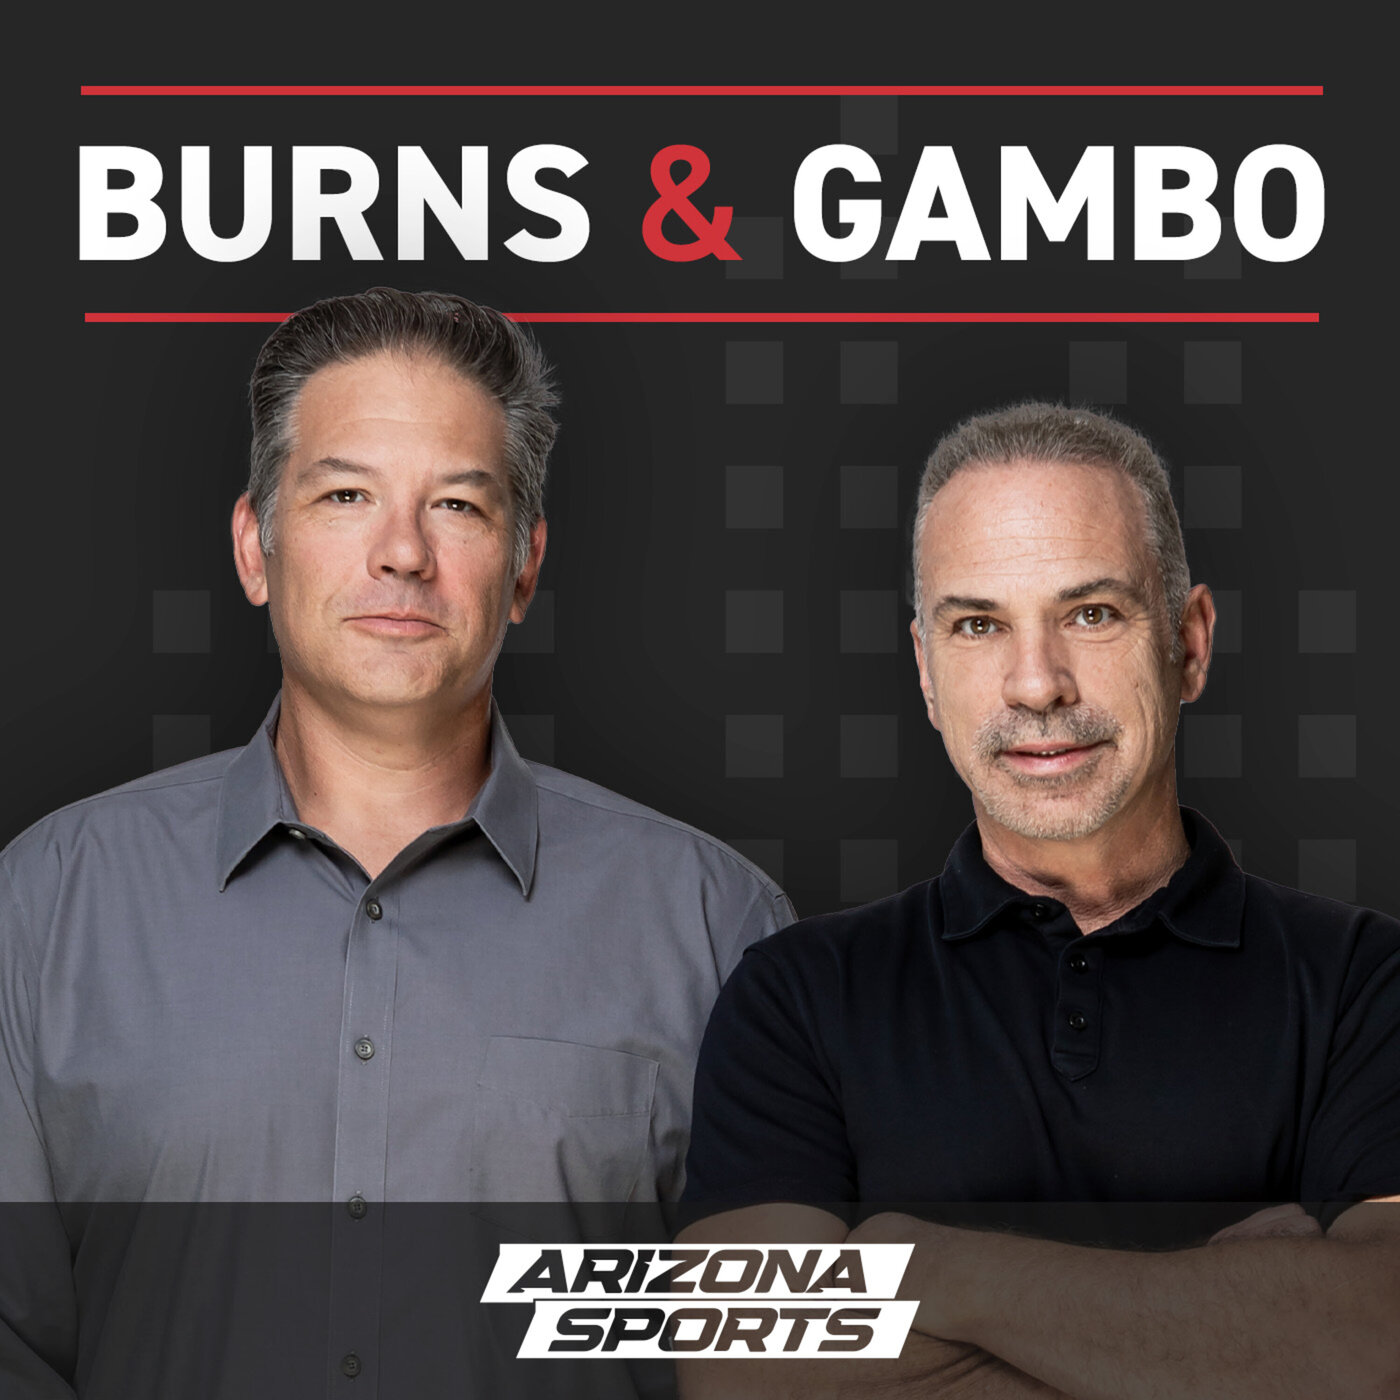 Burns & Gambo on the top storylines to watch for during Cardinals/Giants (Hour 3)